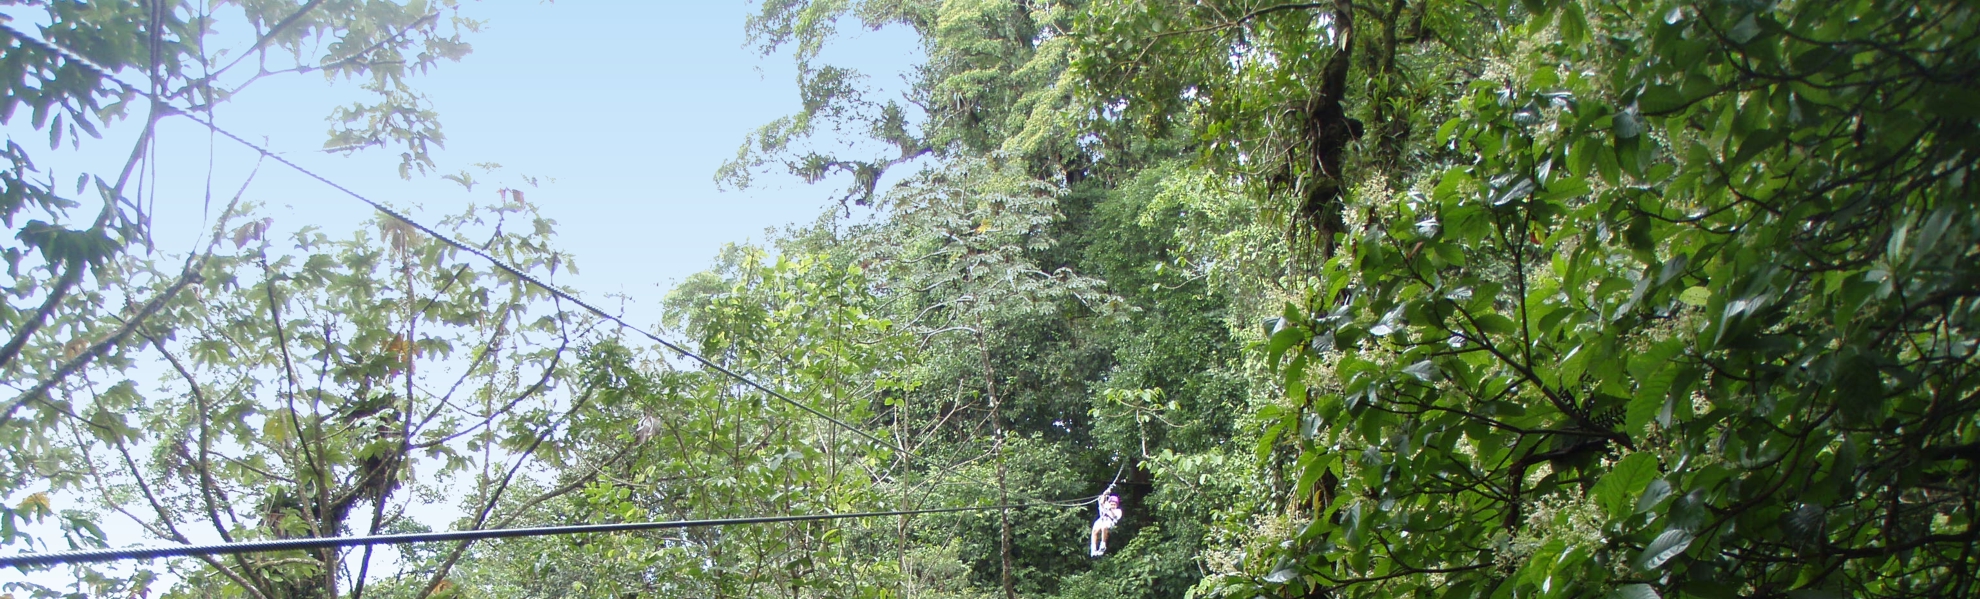 Serendipity preferred canopy tour - note double cables 